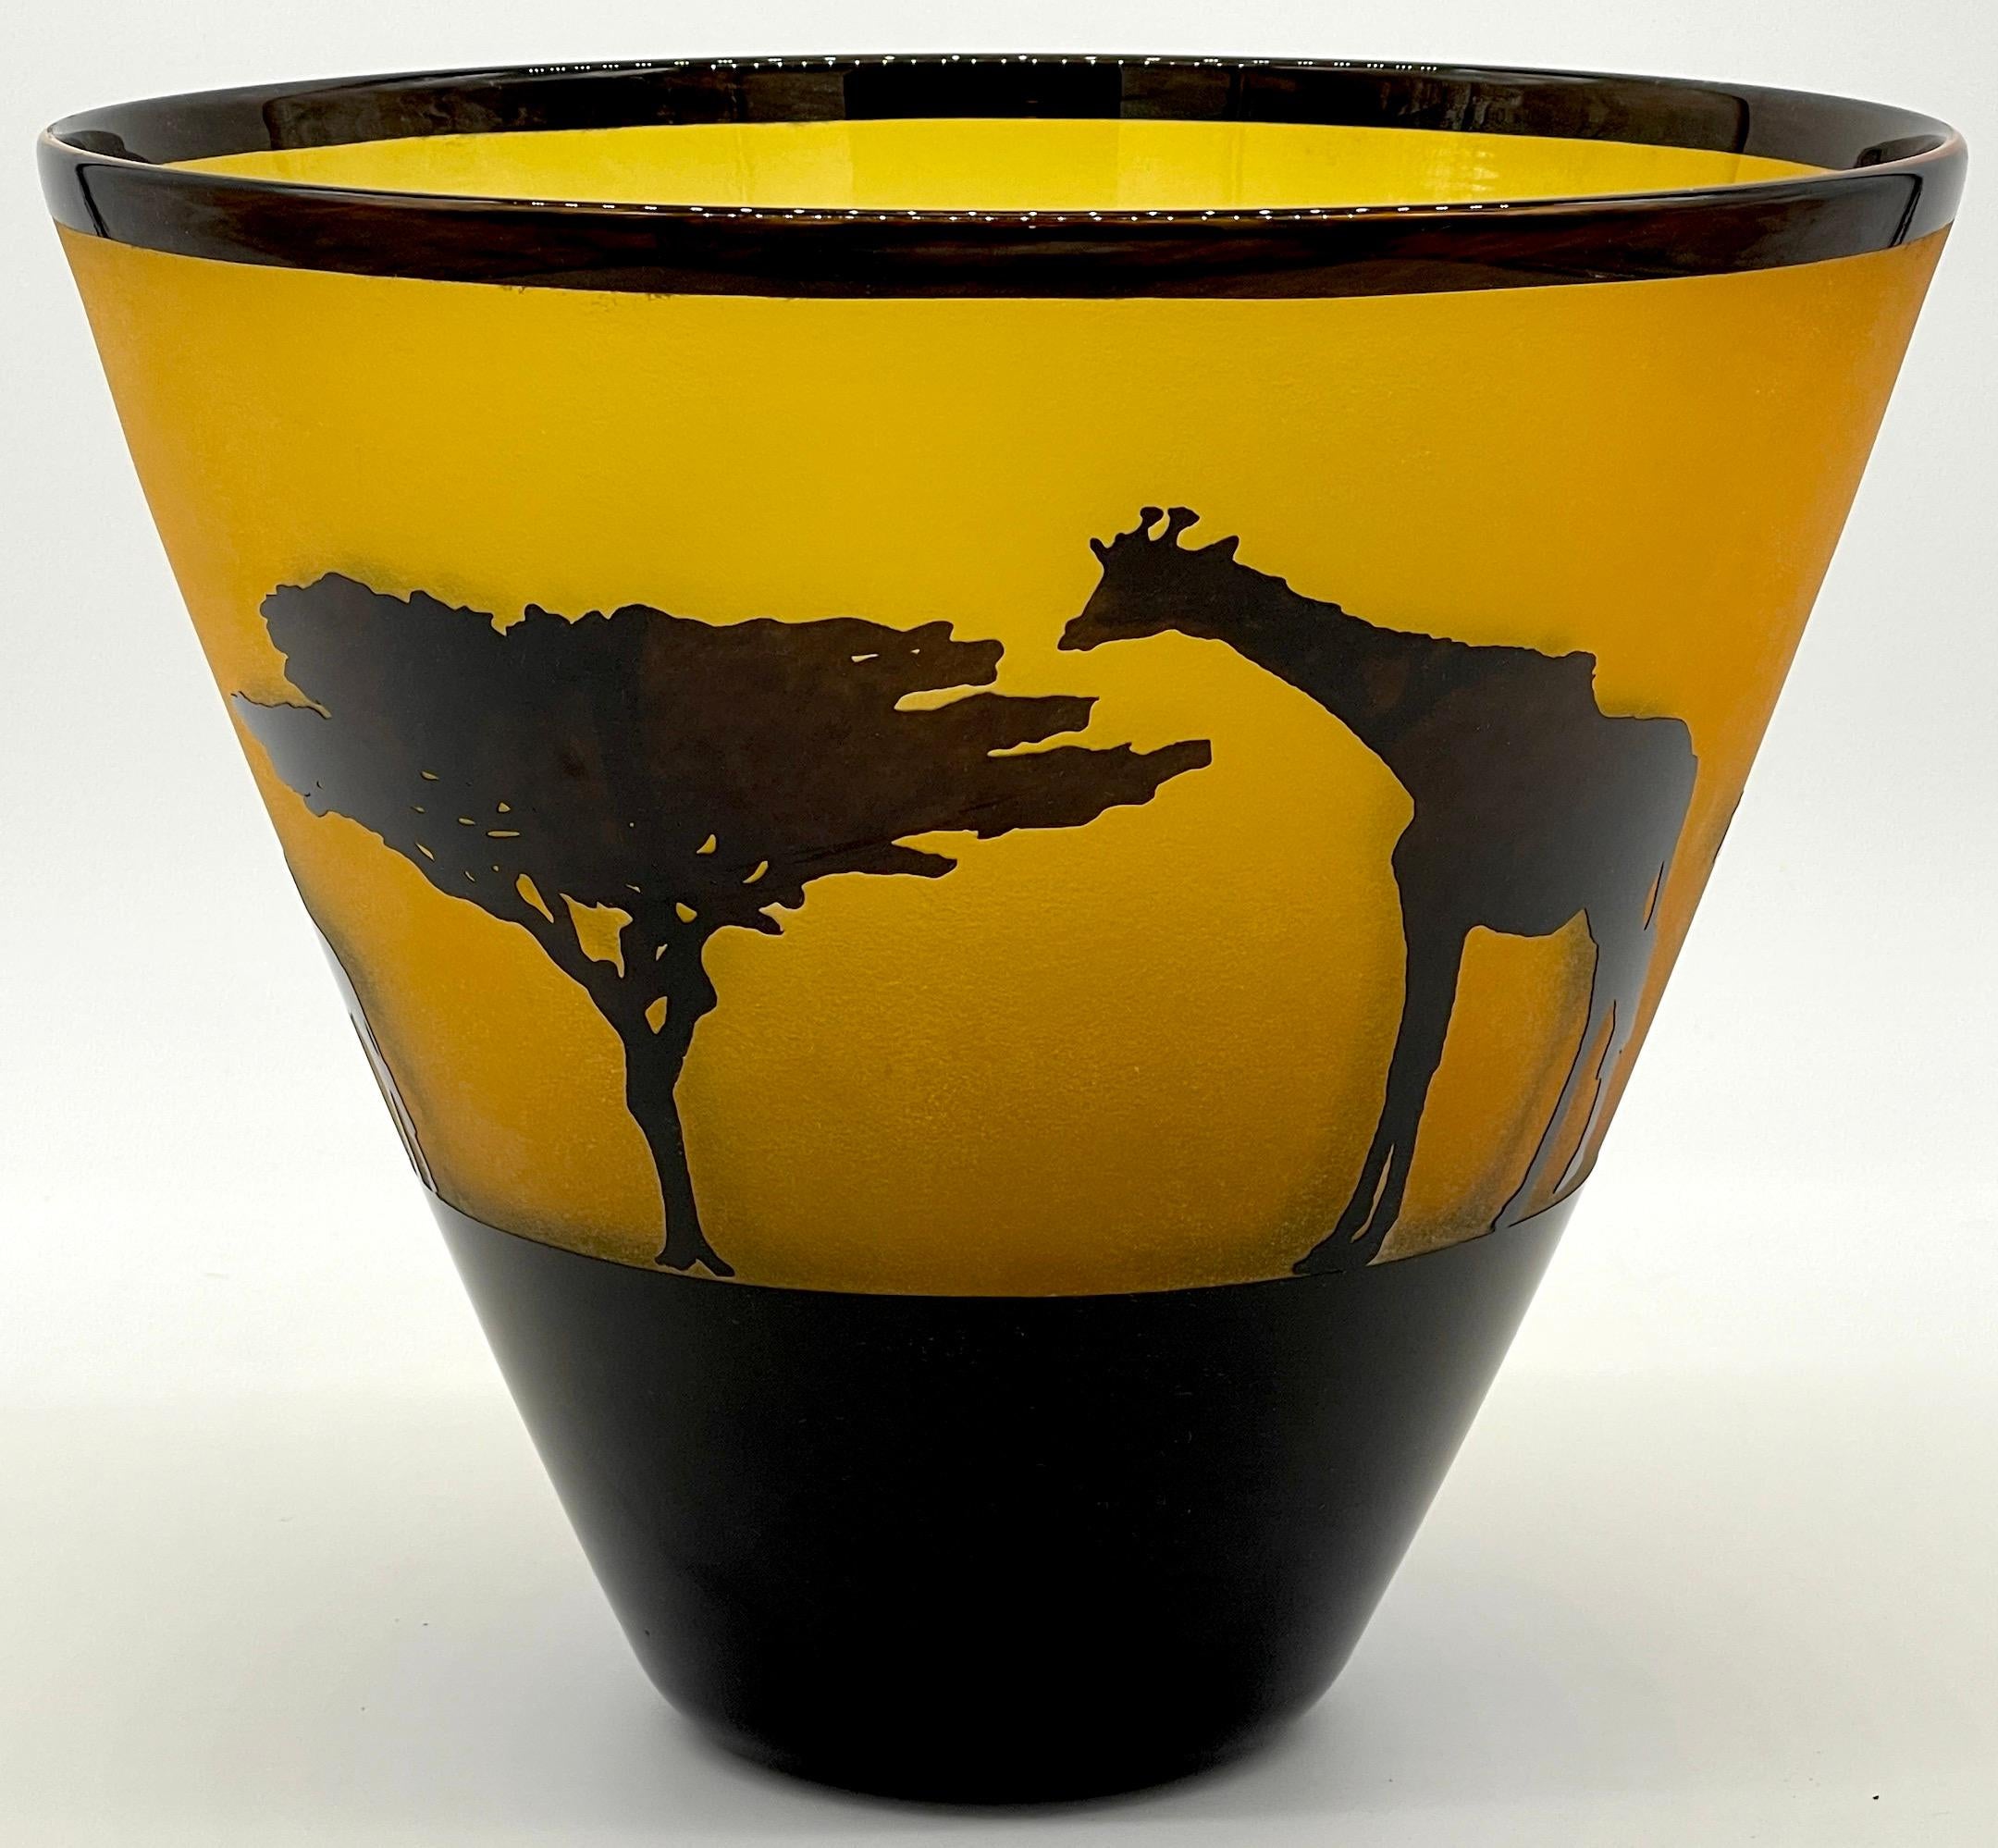 American African Landscape Cameo Glass Vase by Steven Correia, 1986 Edition of #168/500